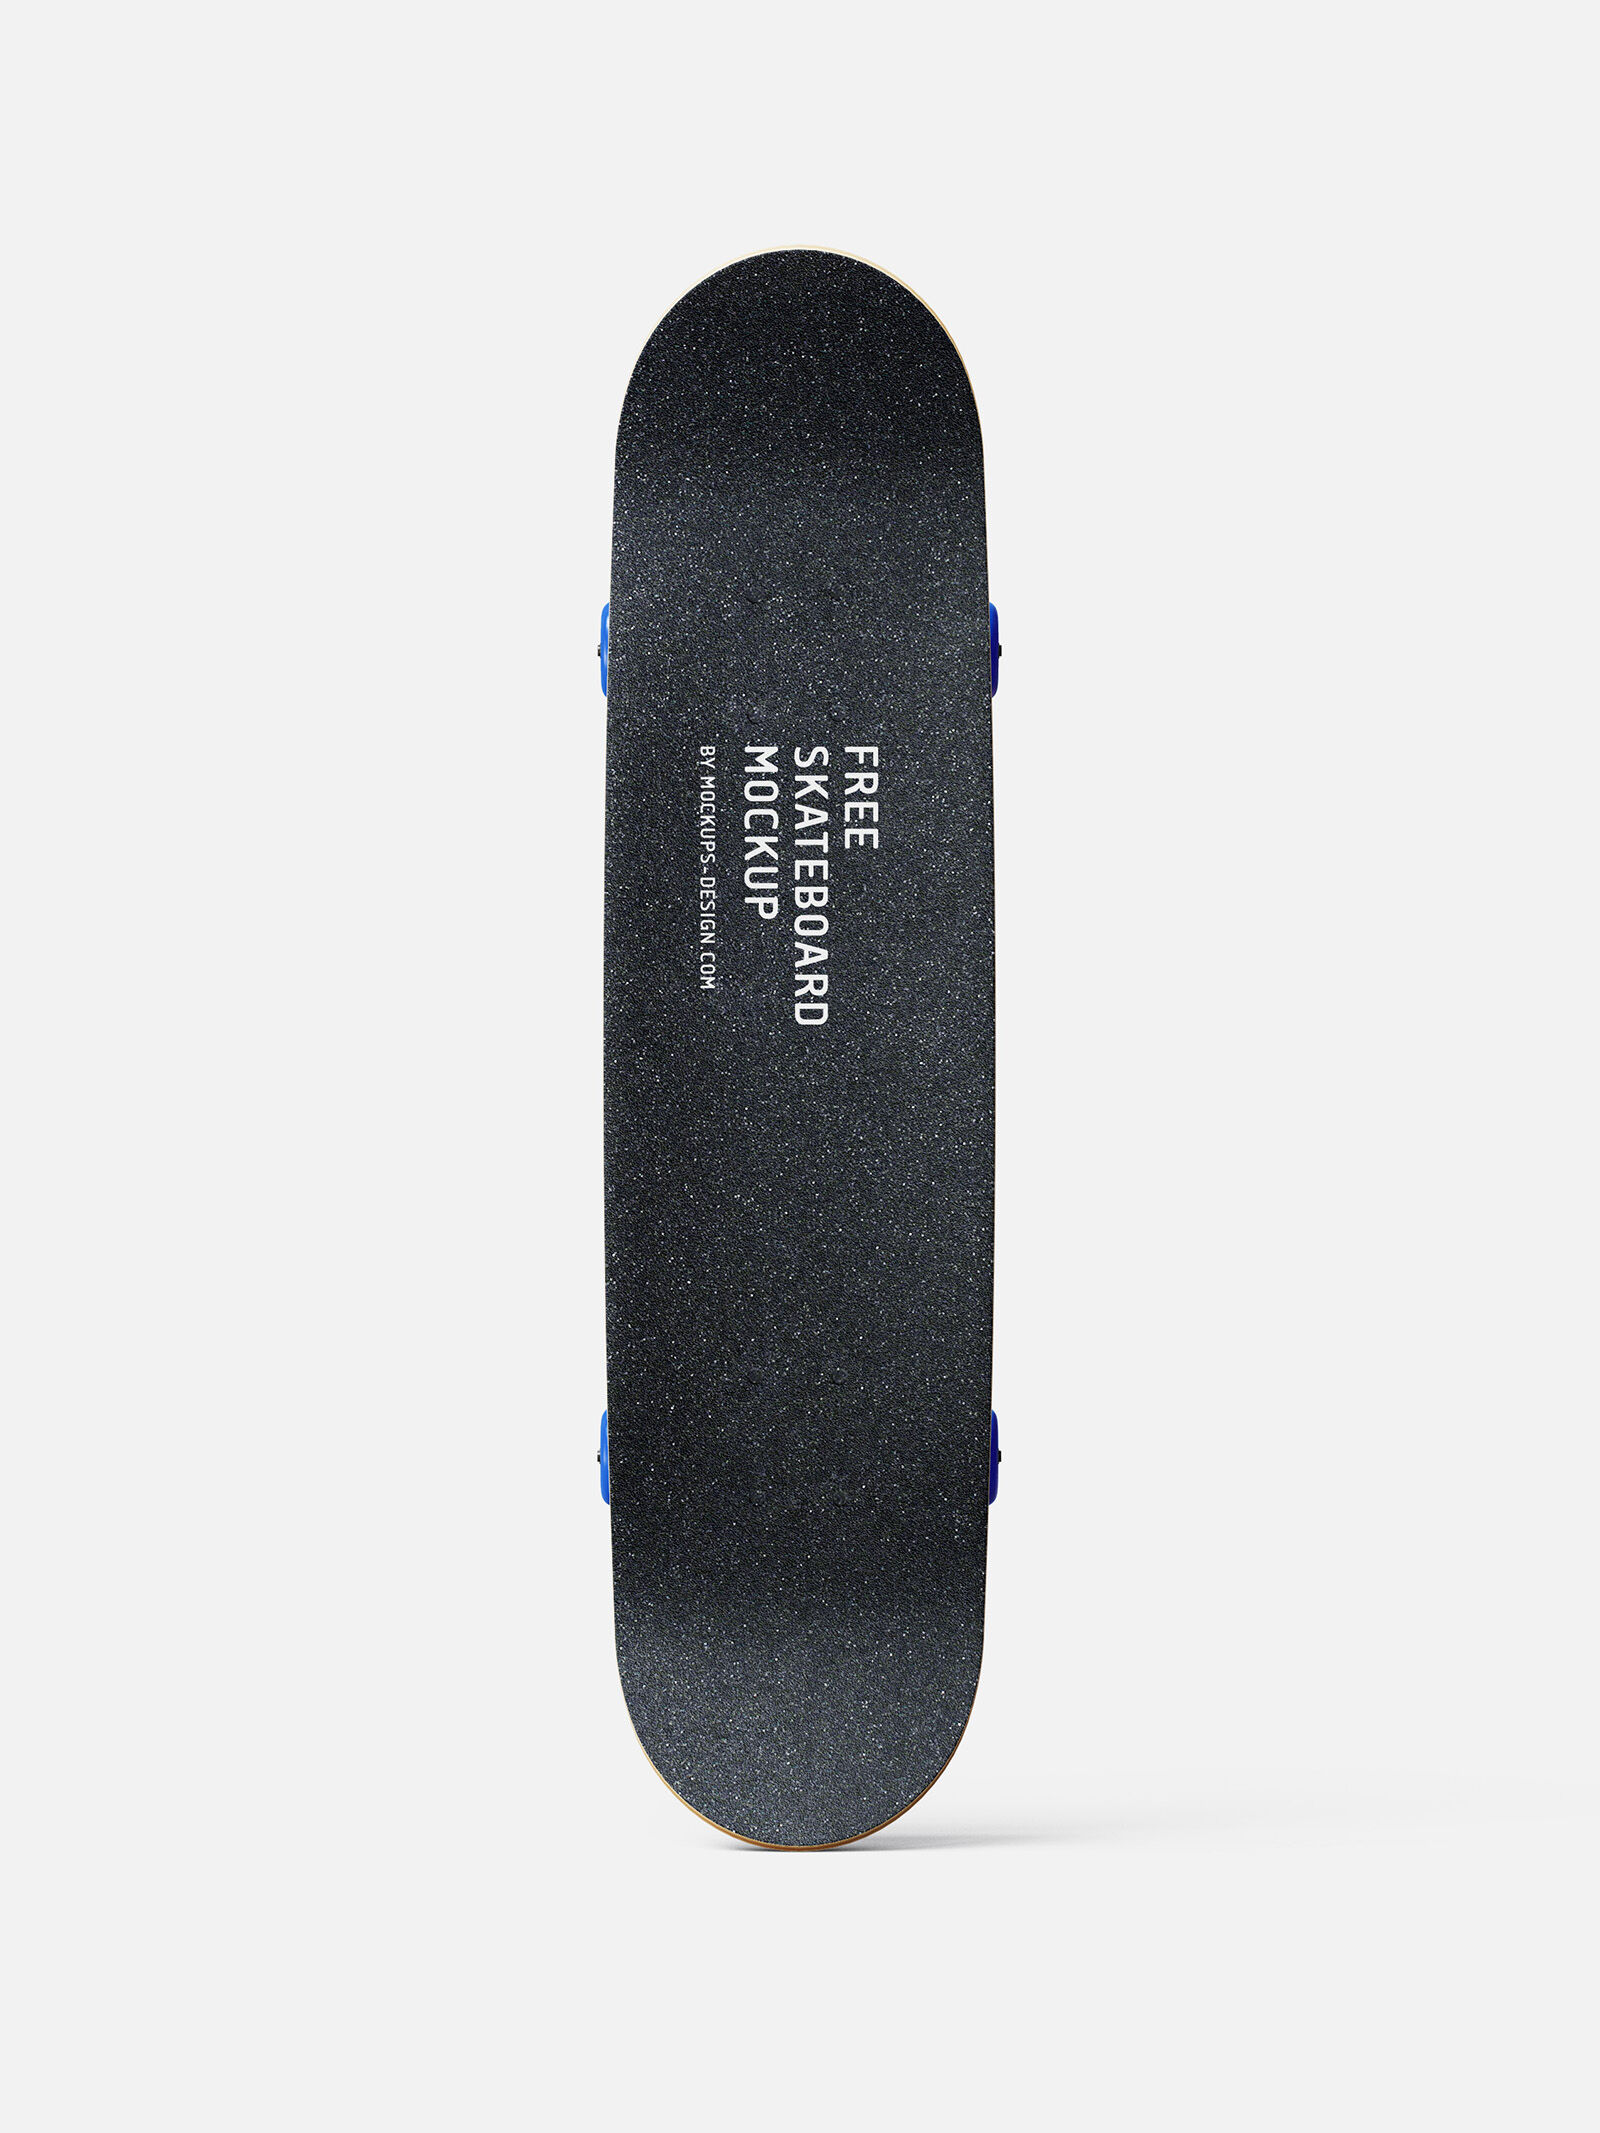 7 Mockups of Skateboards in the Perspective View FREE PSD